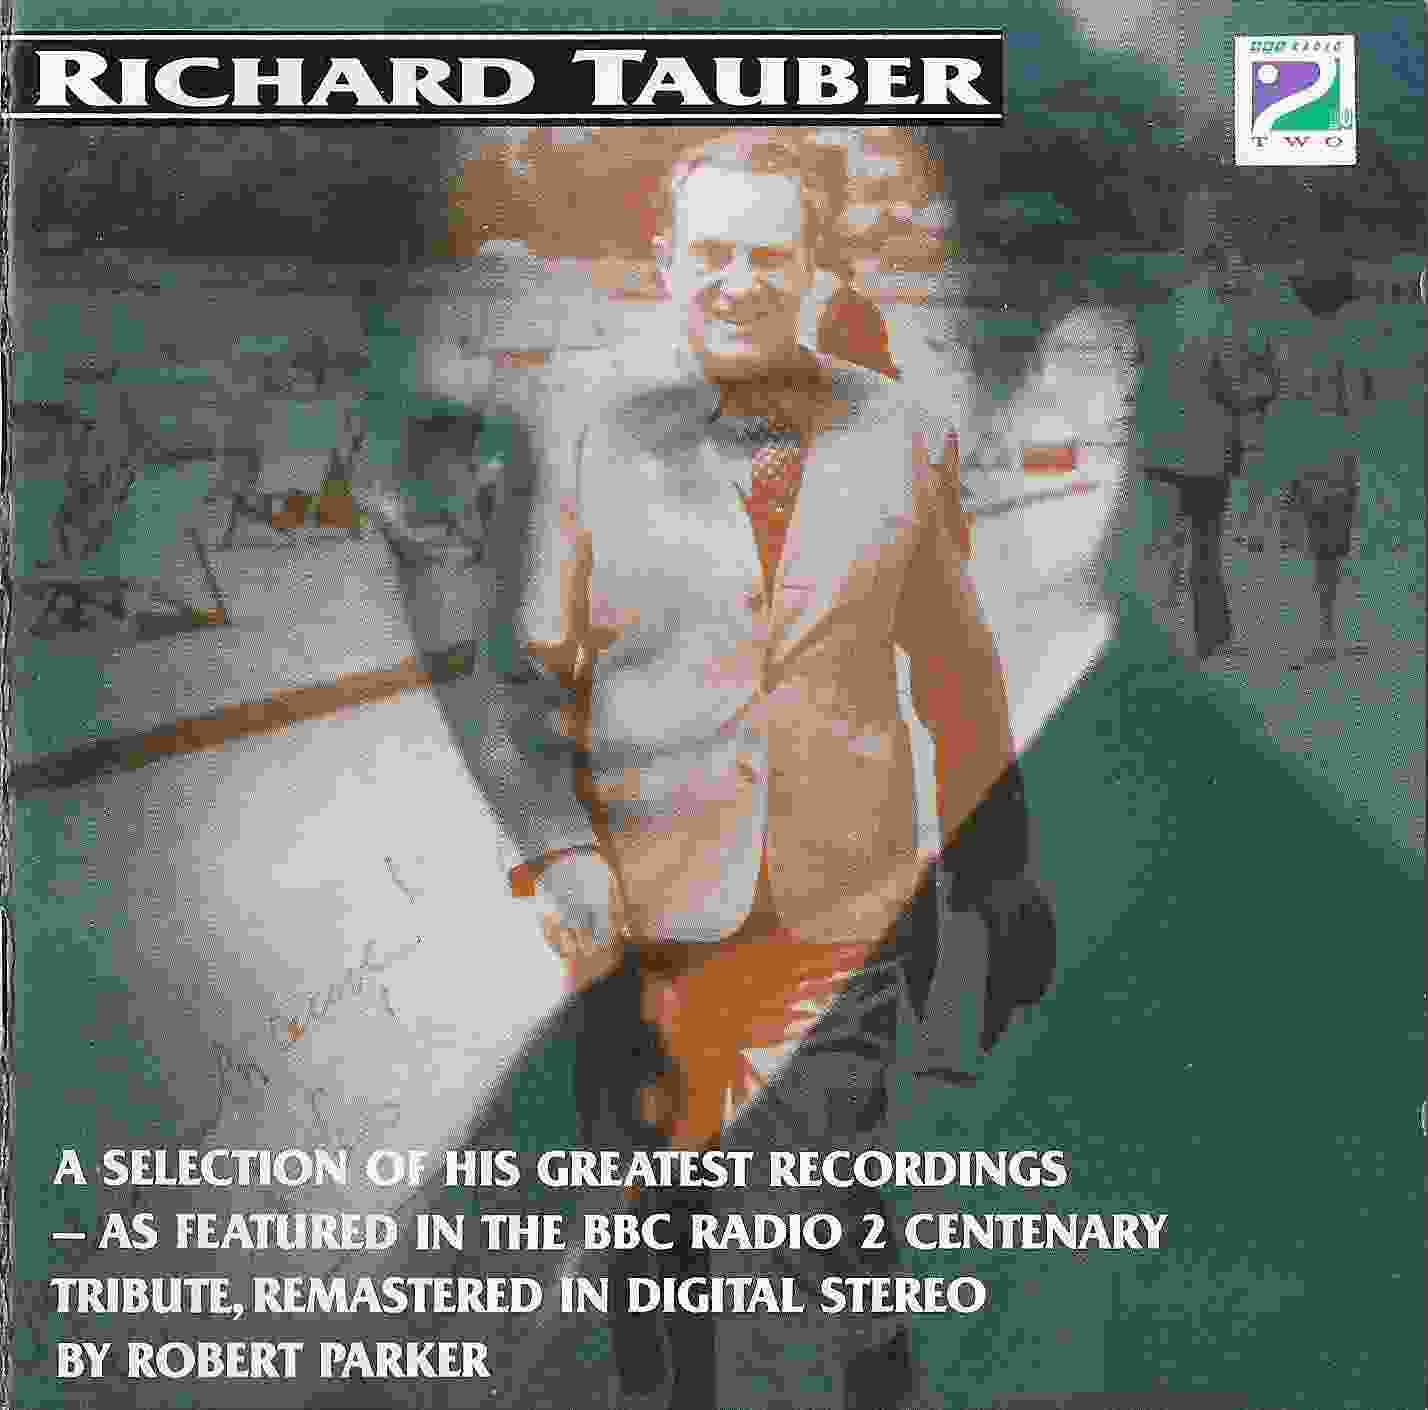 Picture of Richard Tauber  A selection of his greatest recordings by artist Richard Tauber from the BBC cds - Records and Tapes library